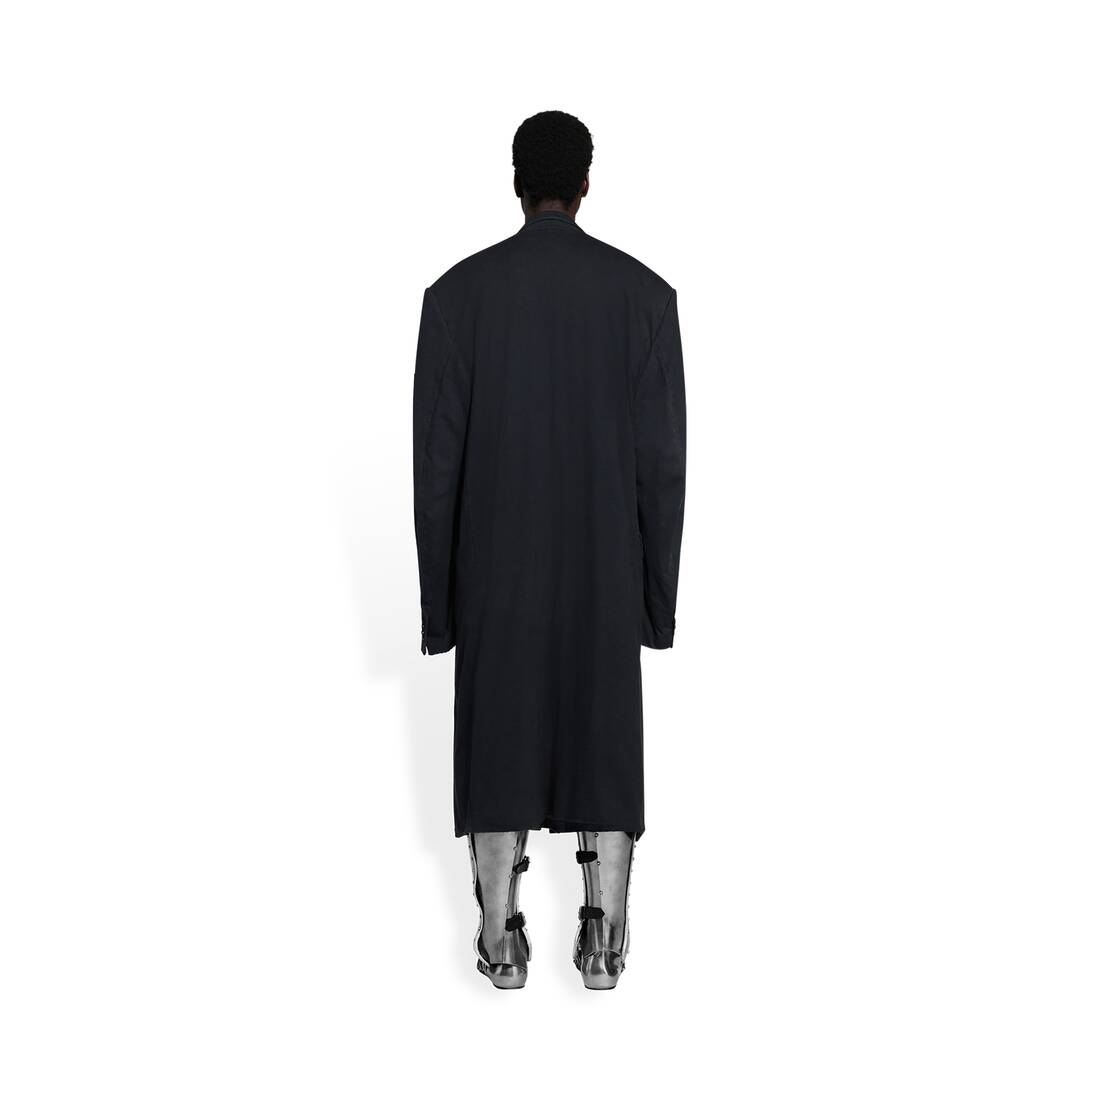 Men's Worn-out Tailored Coat in Black